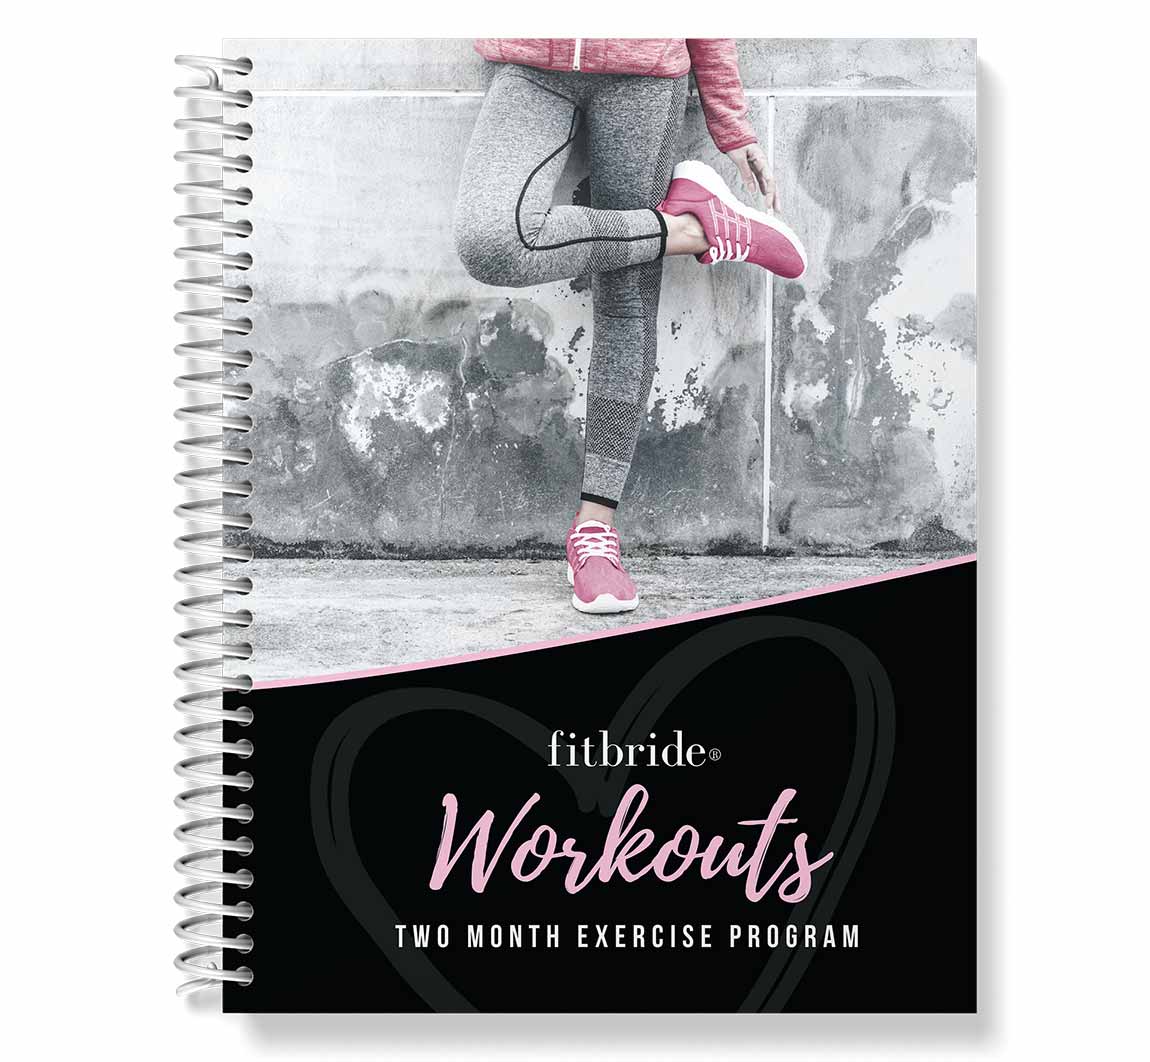 Cover of the Fitbride 8-week workout program